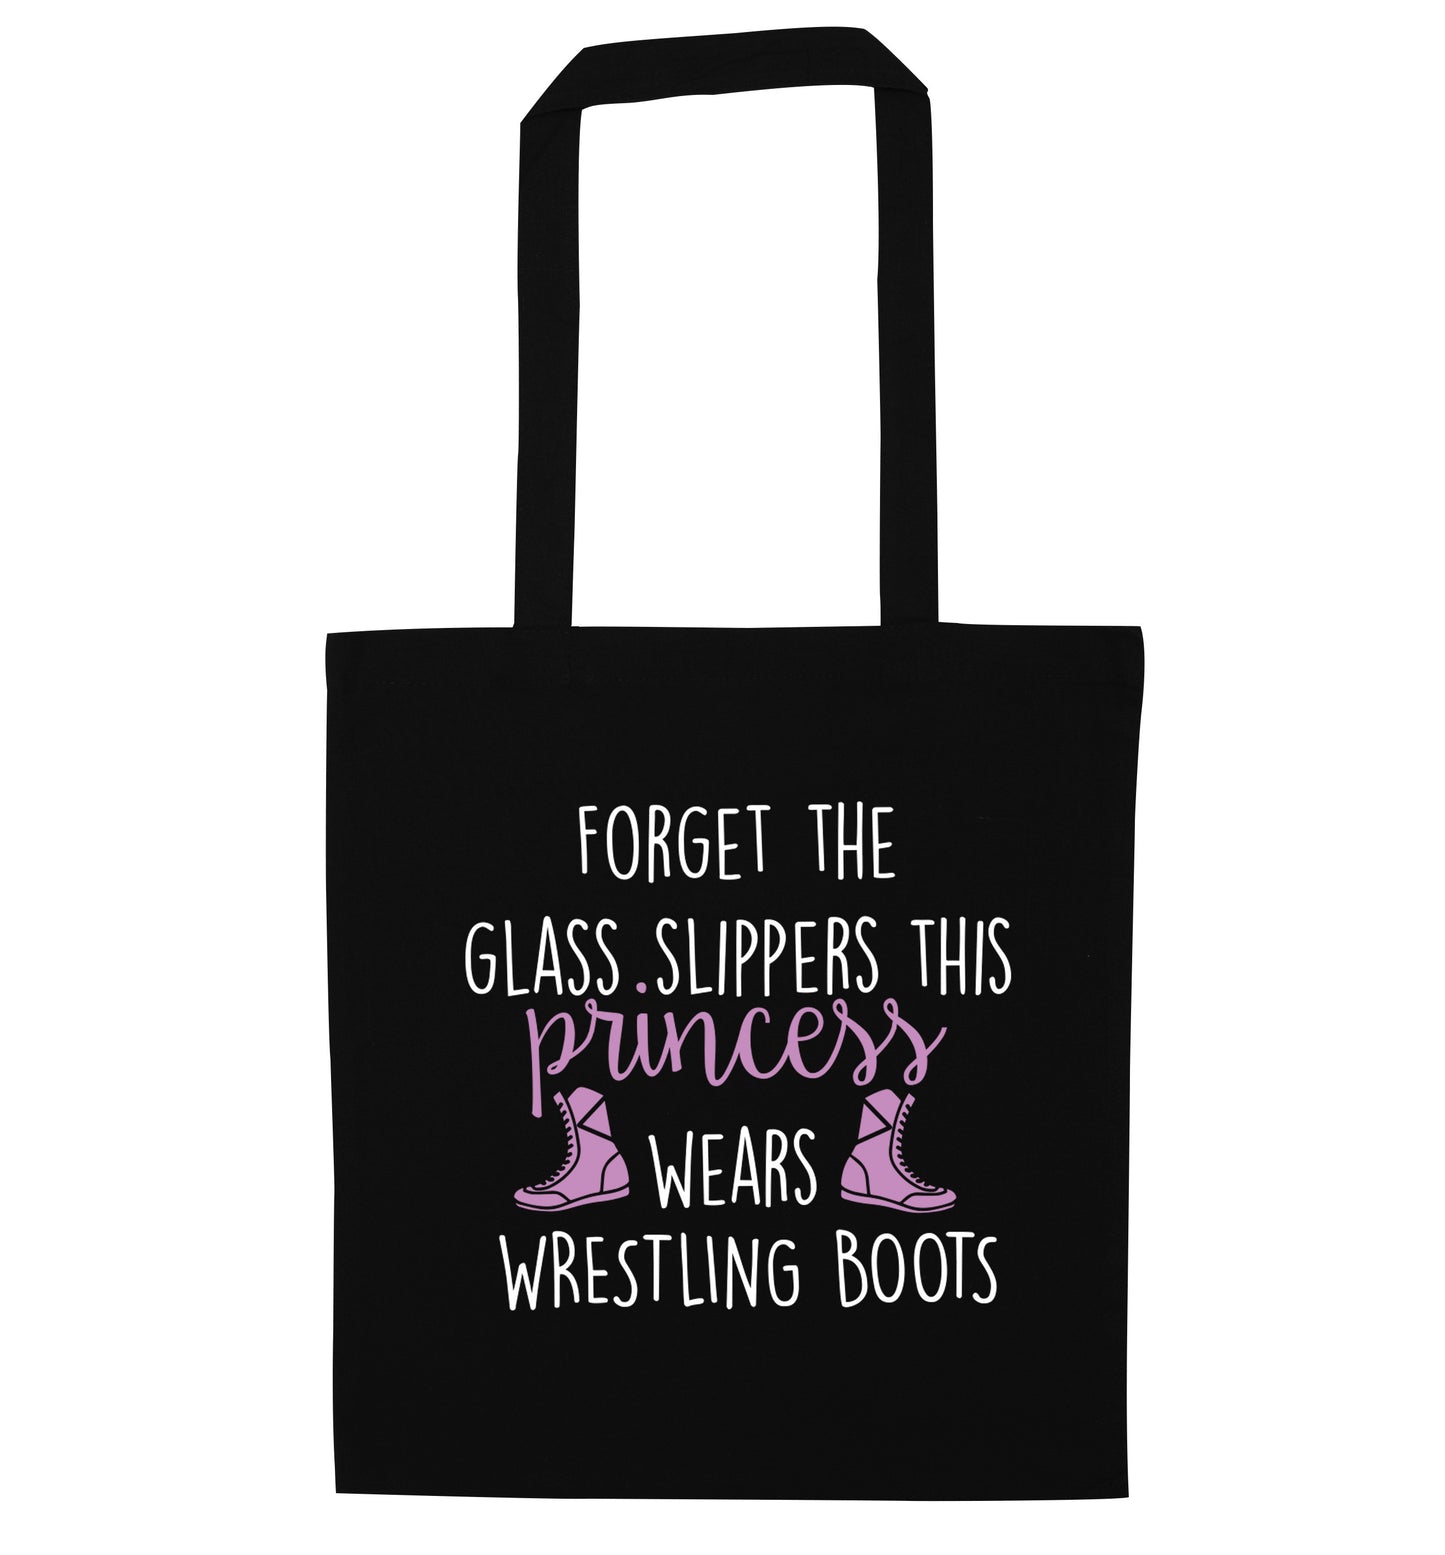 Forget the glass slippers this princess wears wrestling boots black tote bag